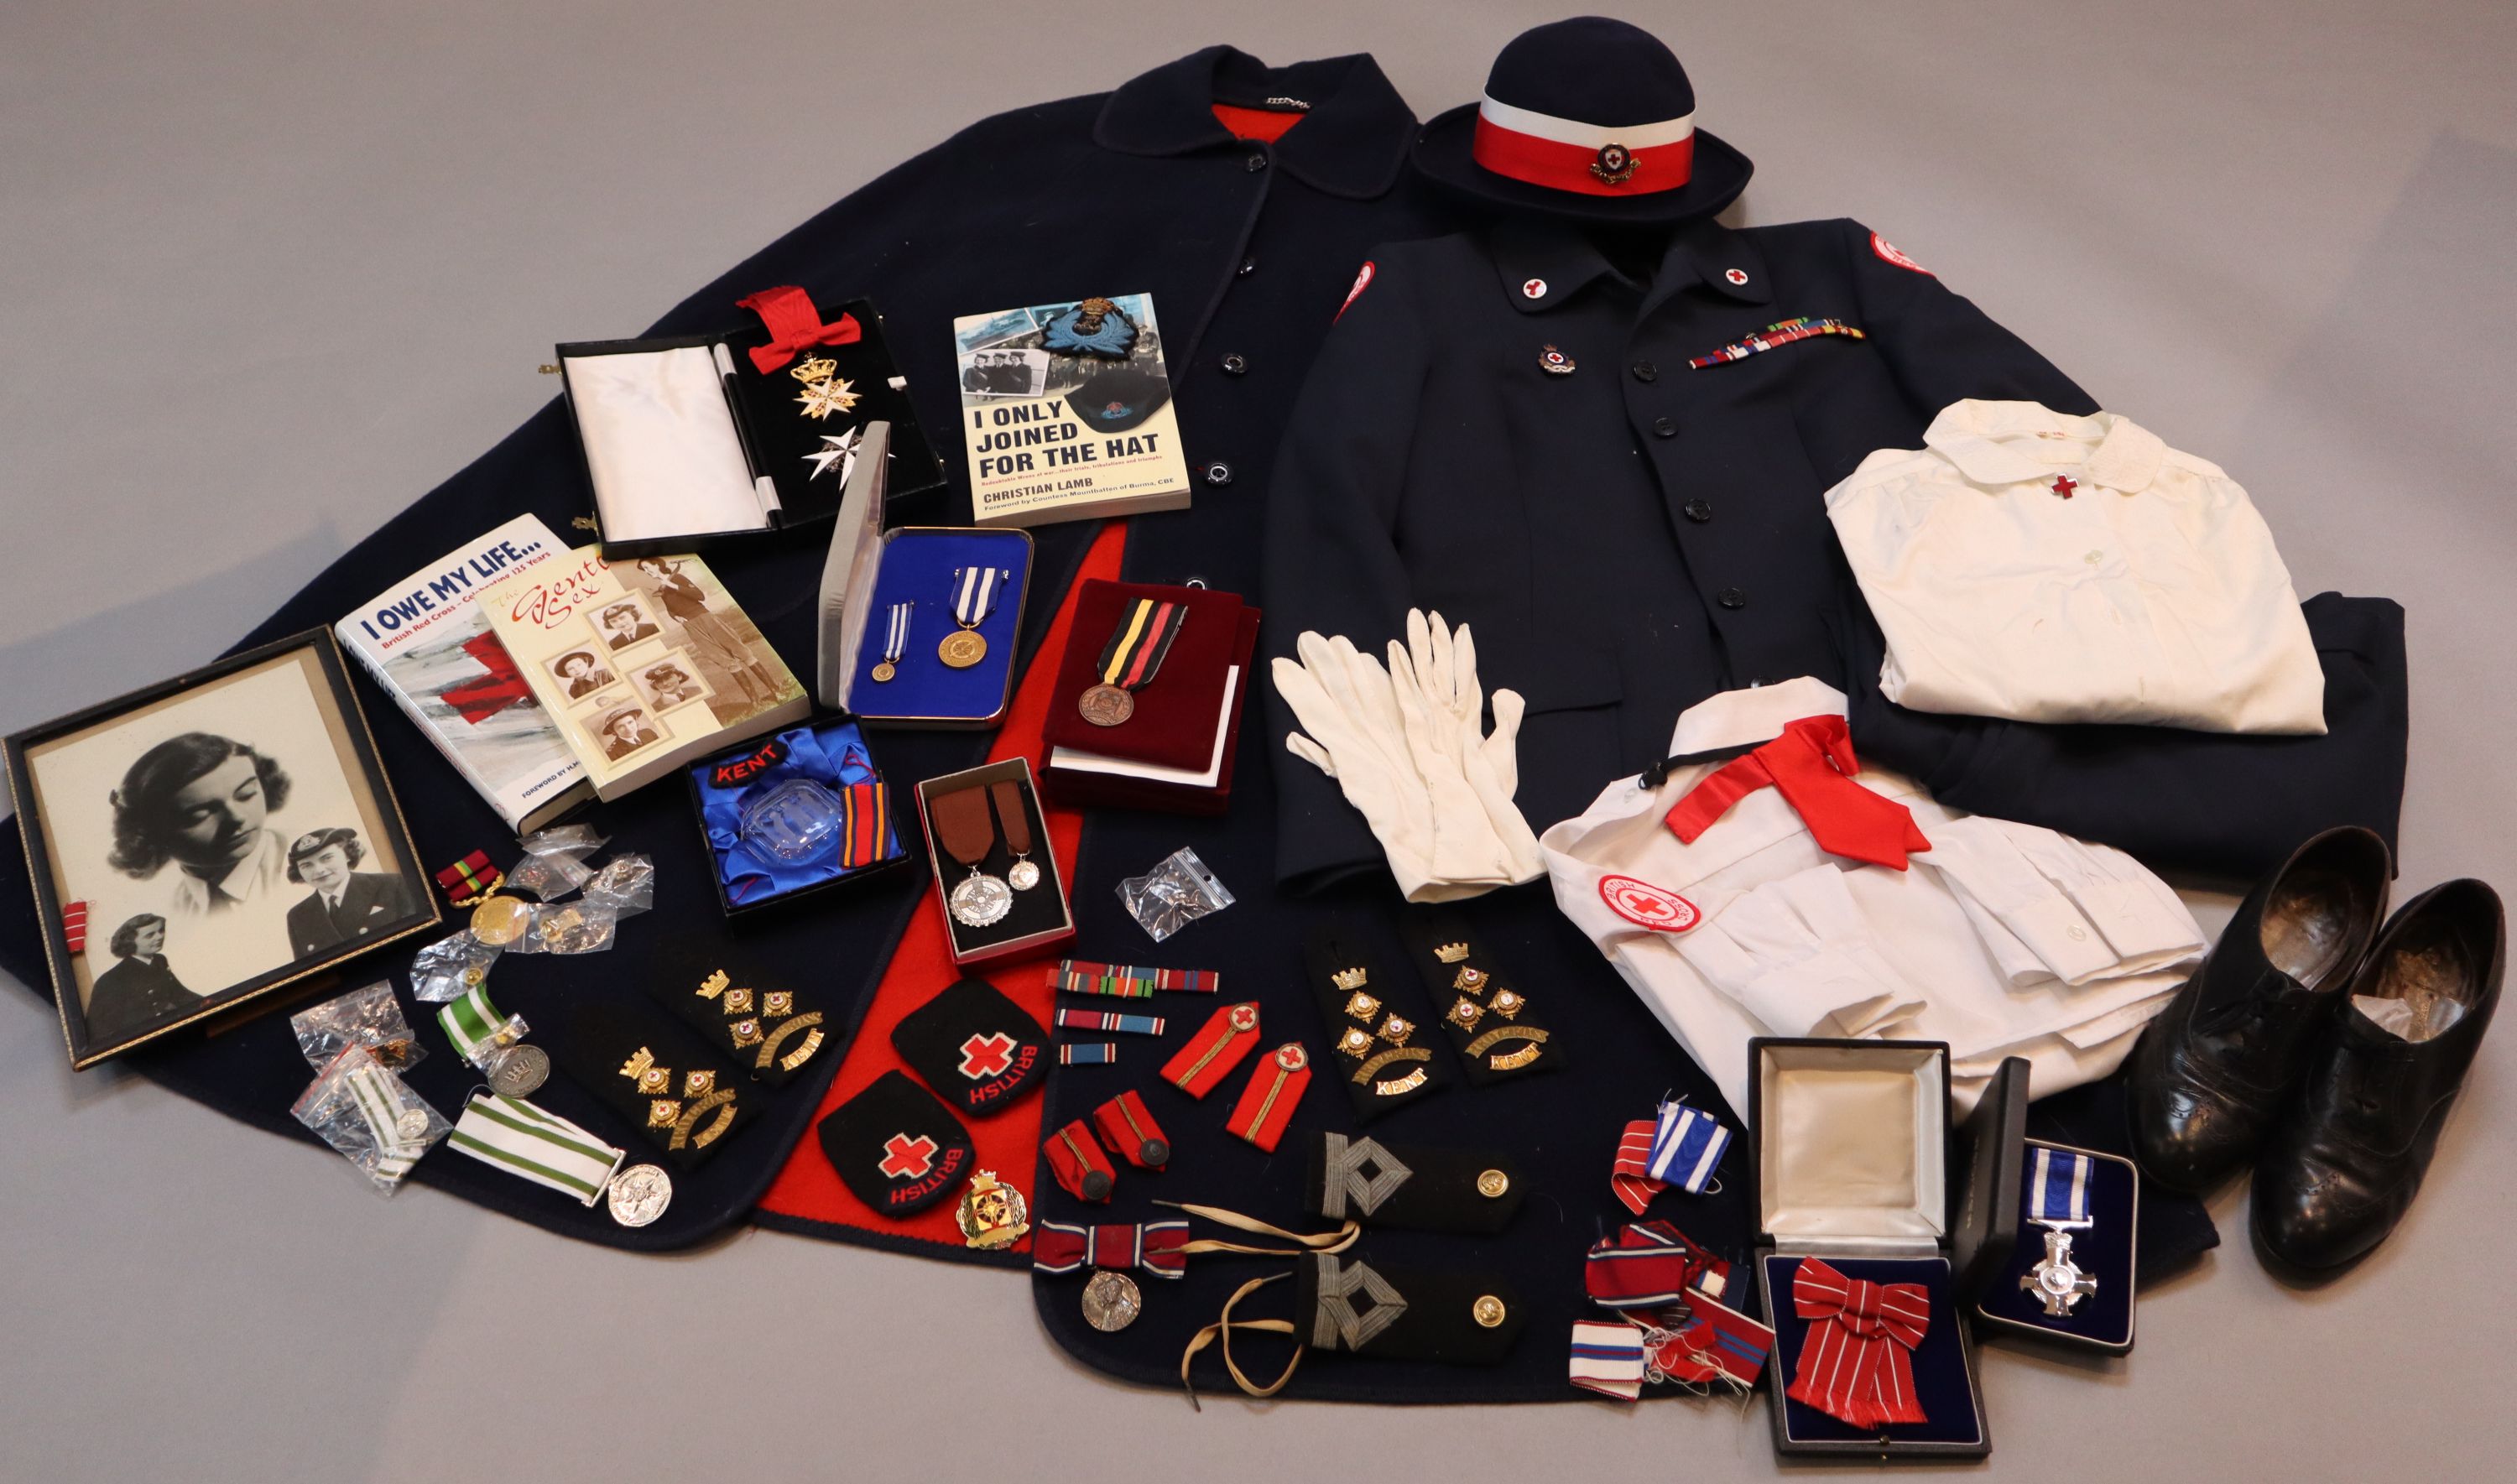 Lady Mountbattens Red Cross uniform, together with related awards, badges and other ephemera,